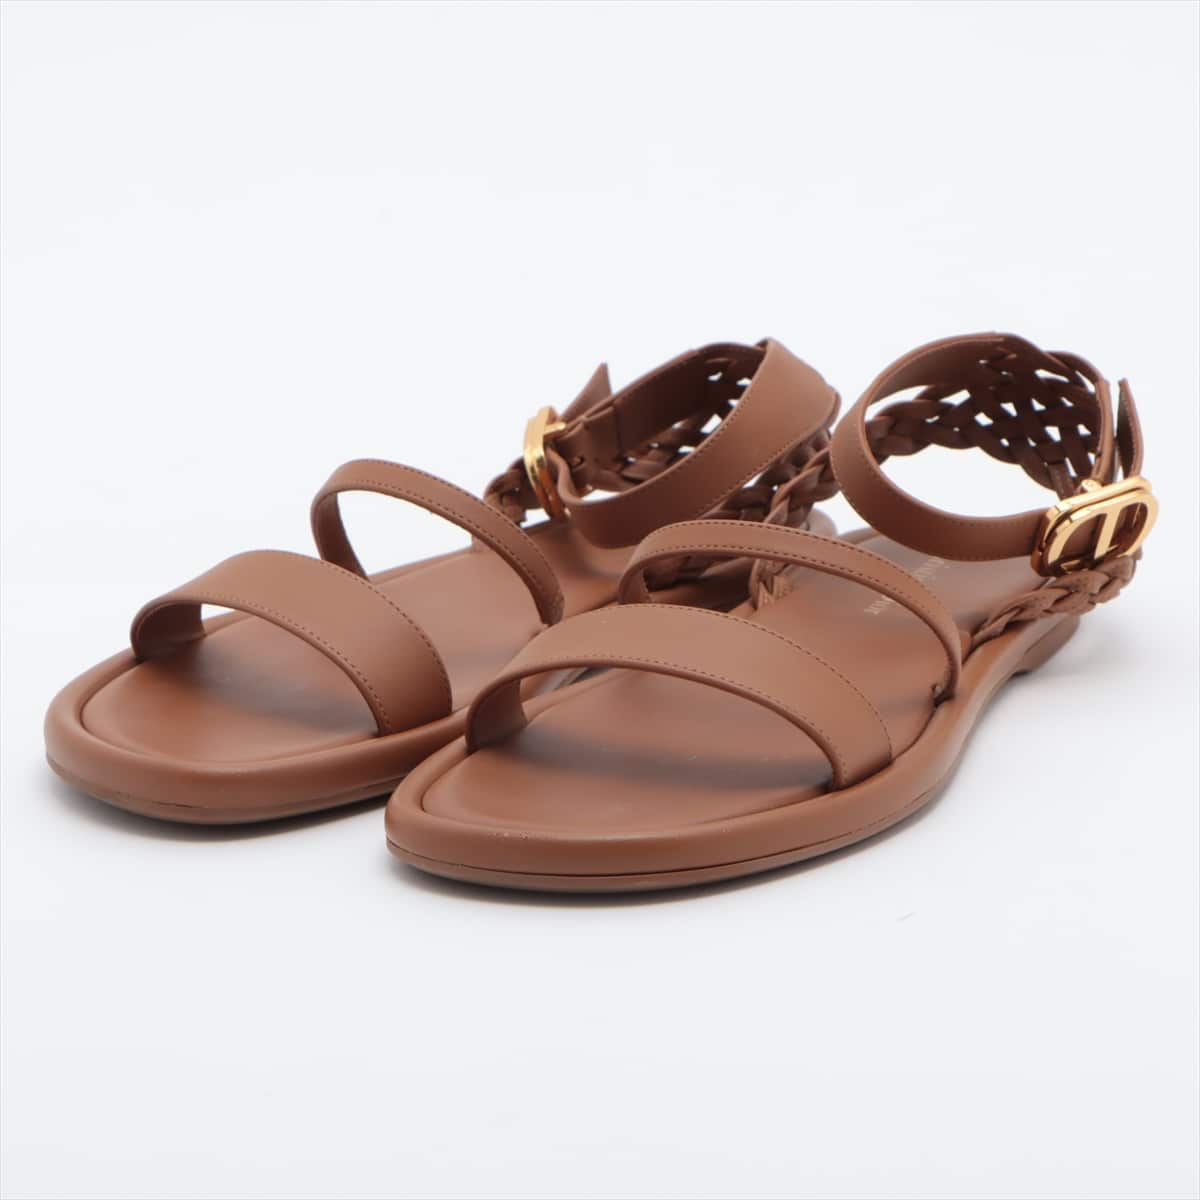 Christian Dior 21 years Leather Sandals 35 1/2 Ladies' Brown DIOR EGEE MD0121